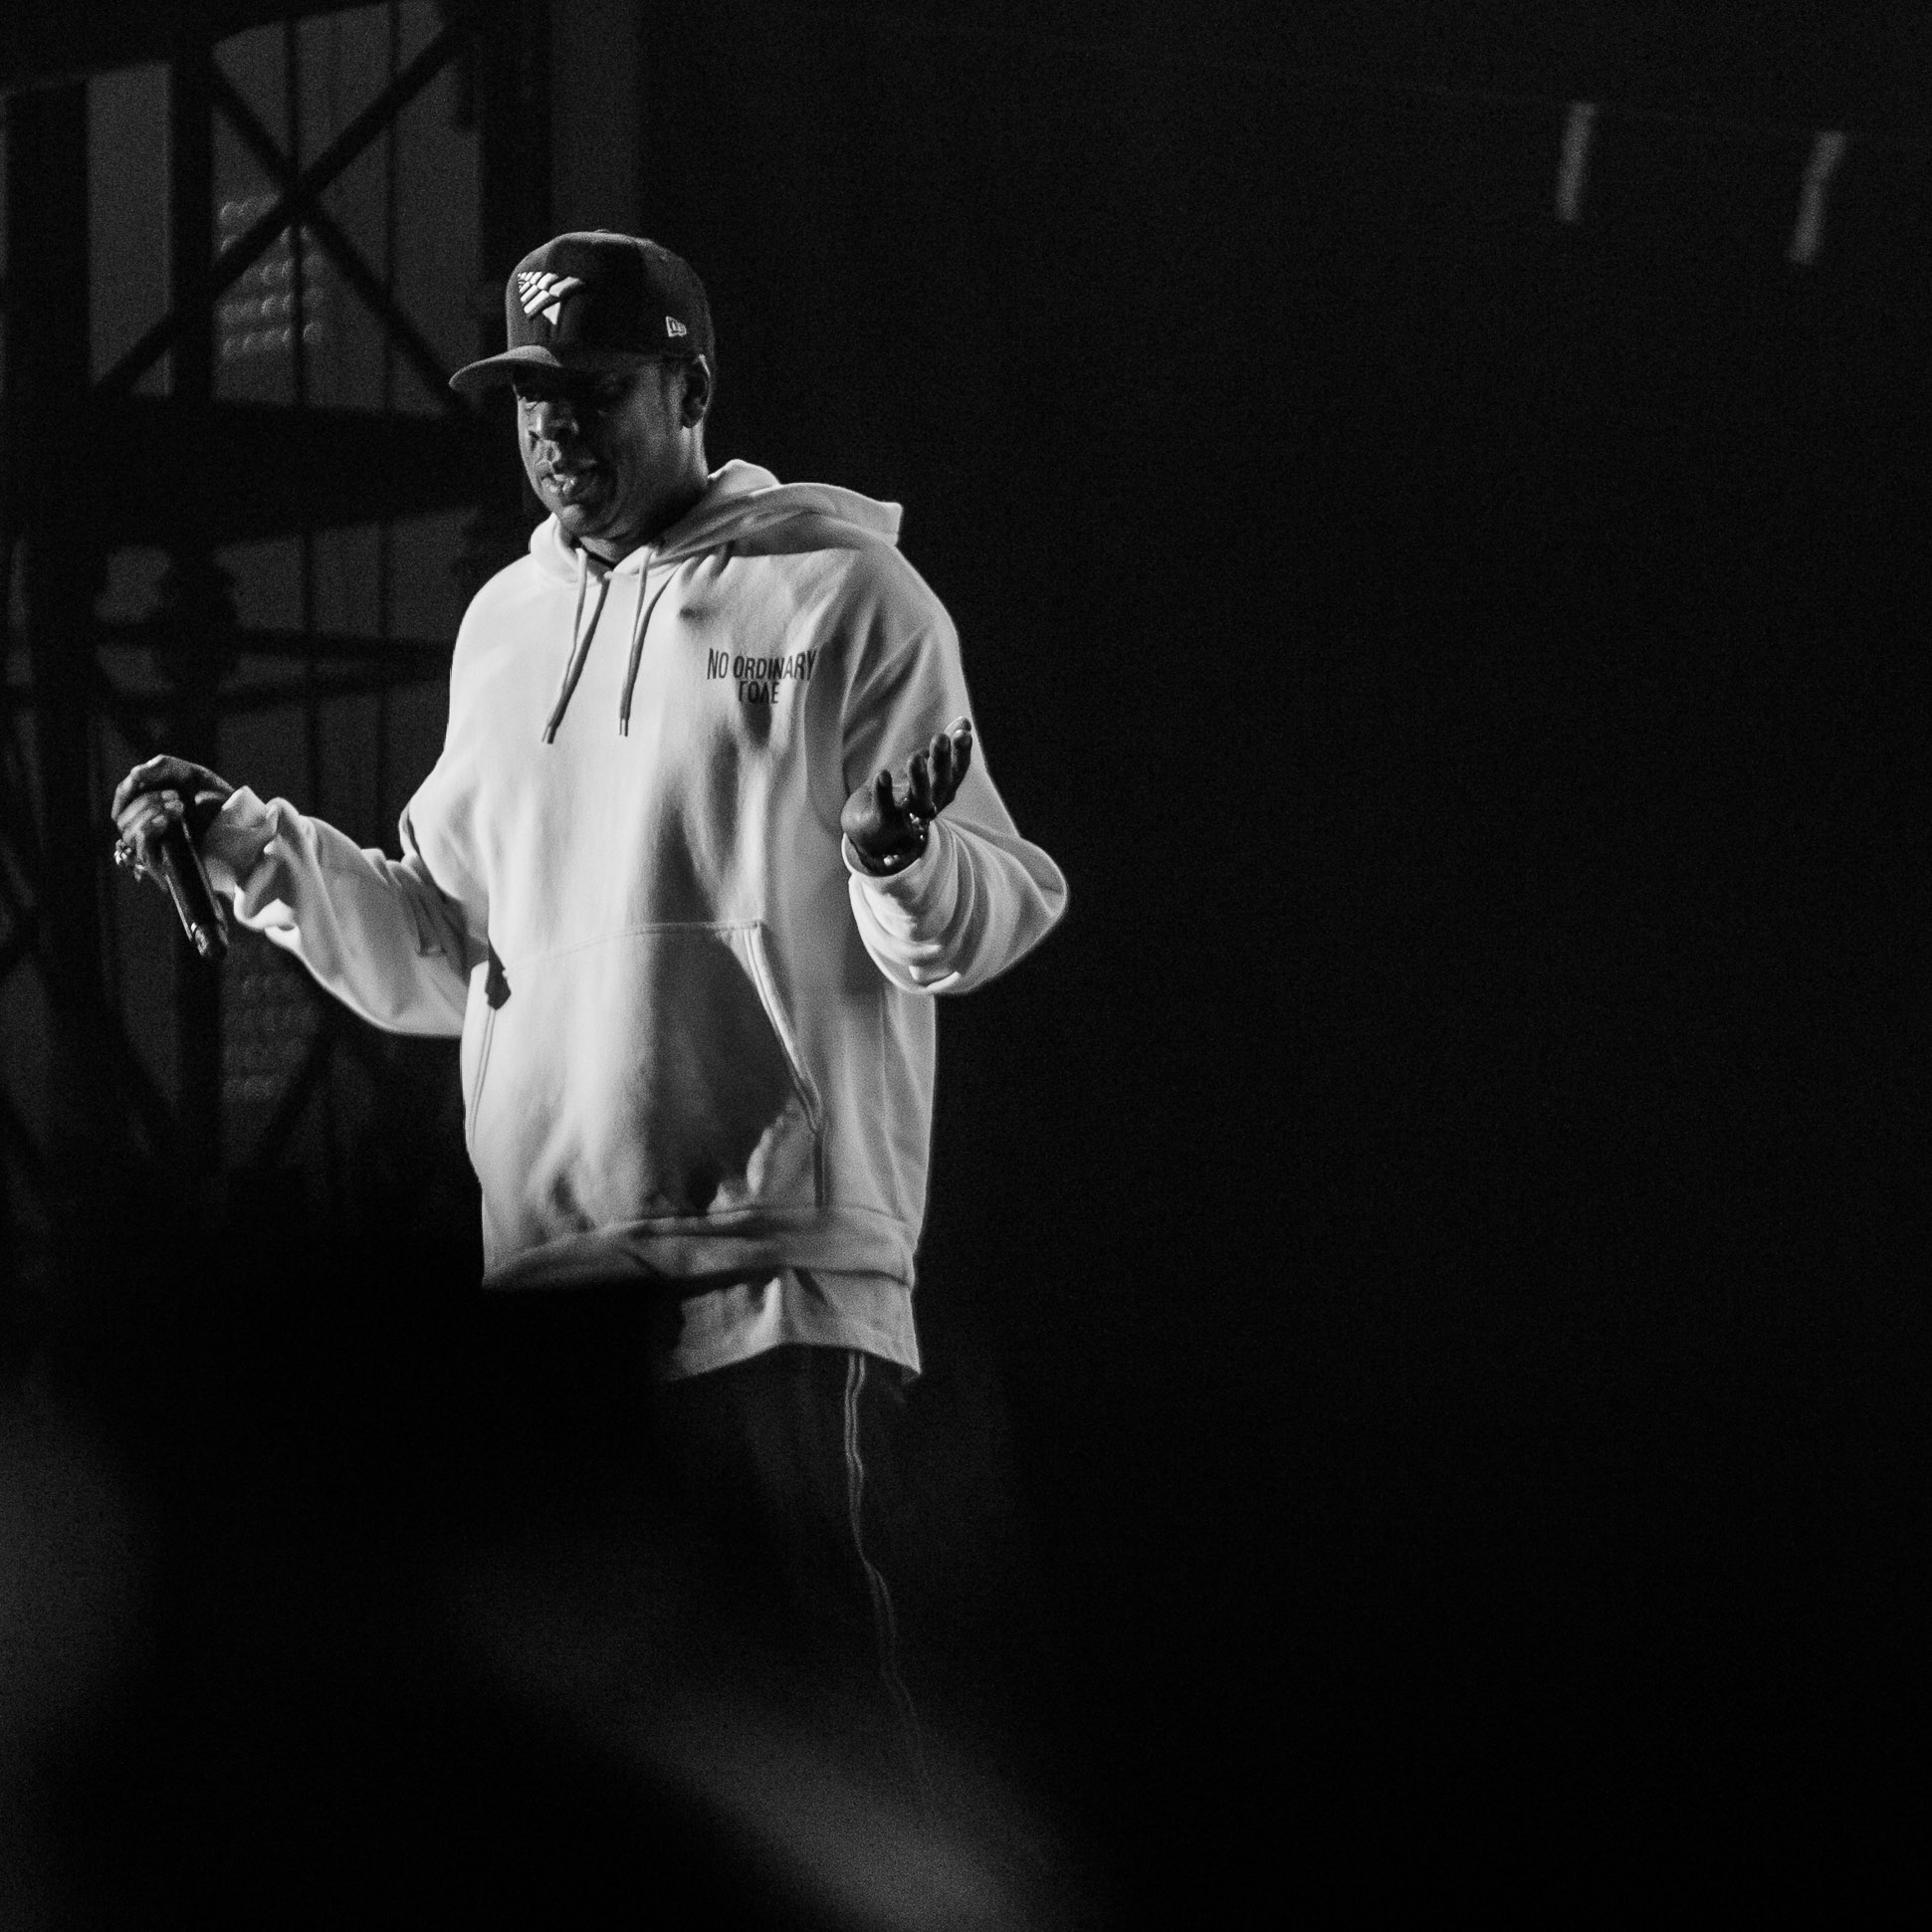 JAY-Z's Made in America 2020 Festival Canceled Due To COVID-19 Pandemic